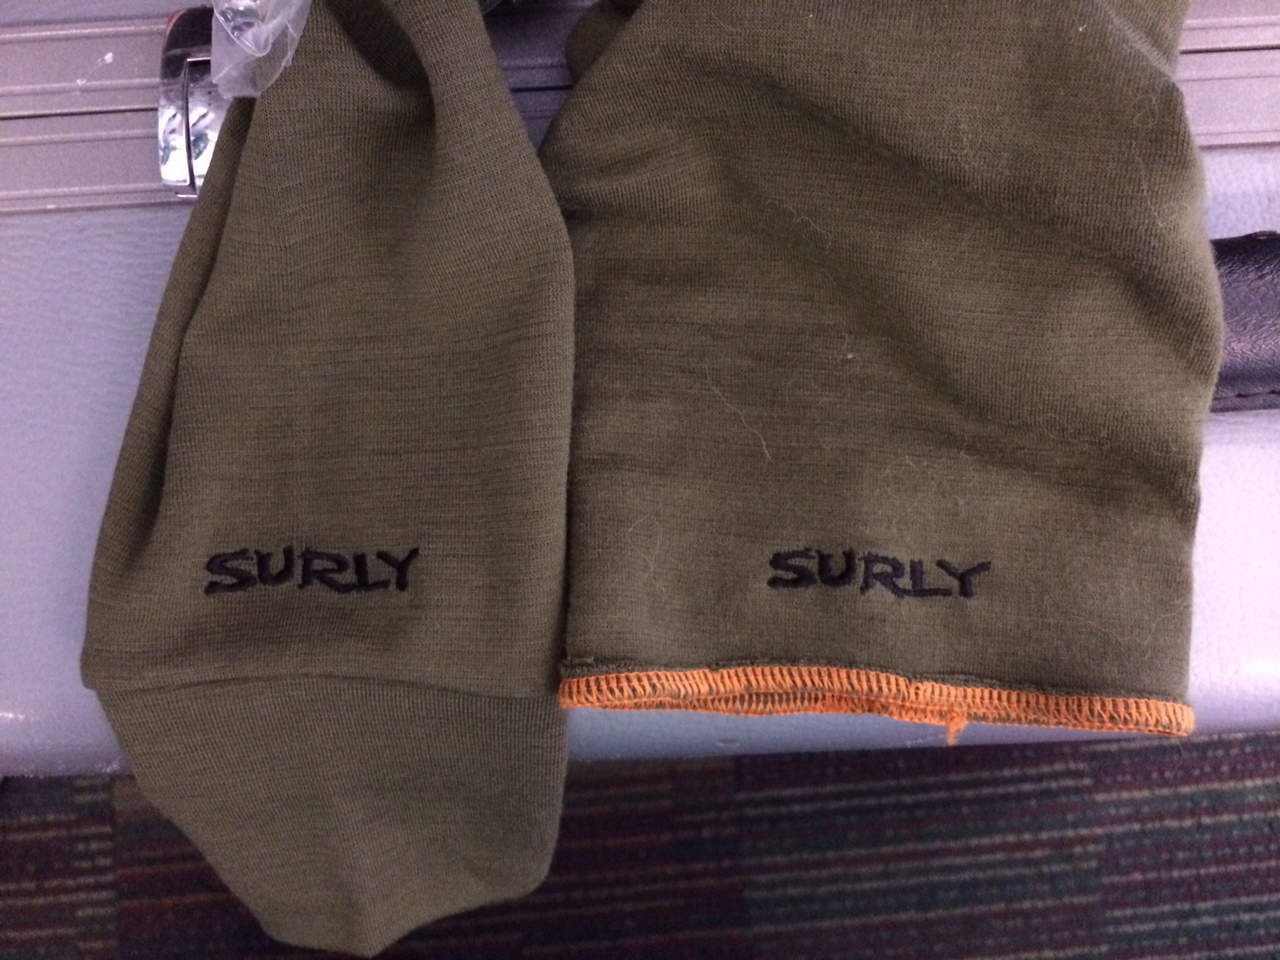 Downward view of 2 Surly long shirt sleeves, laying next to each other, one with tapered wrist cuff and one without